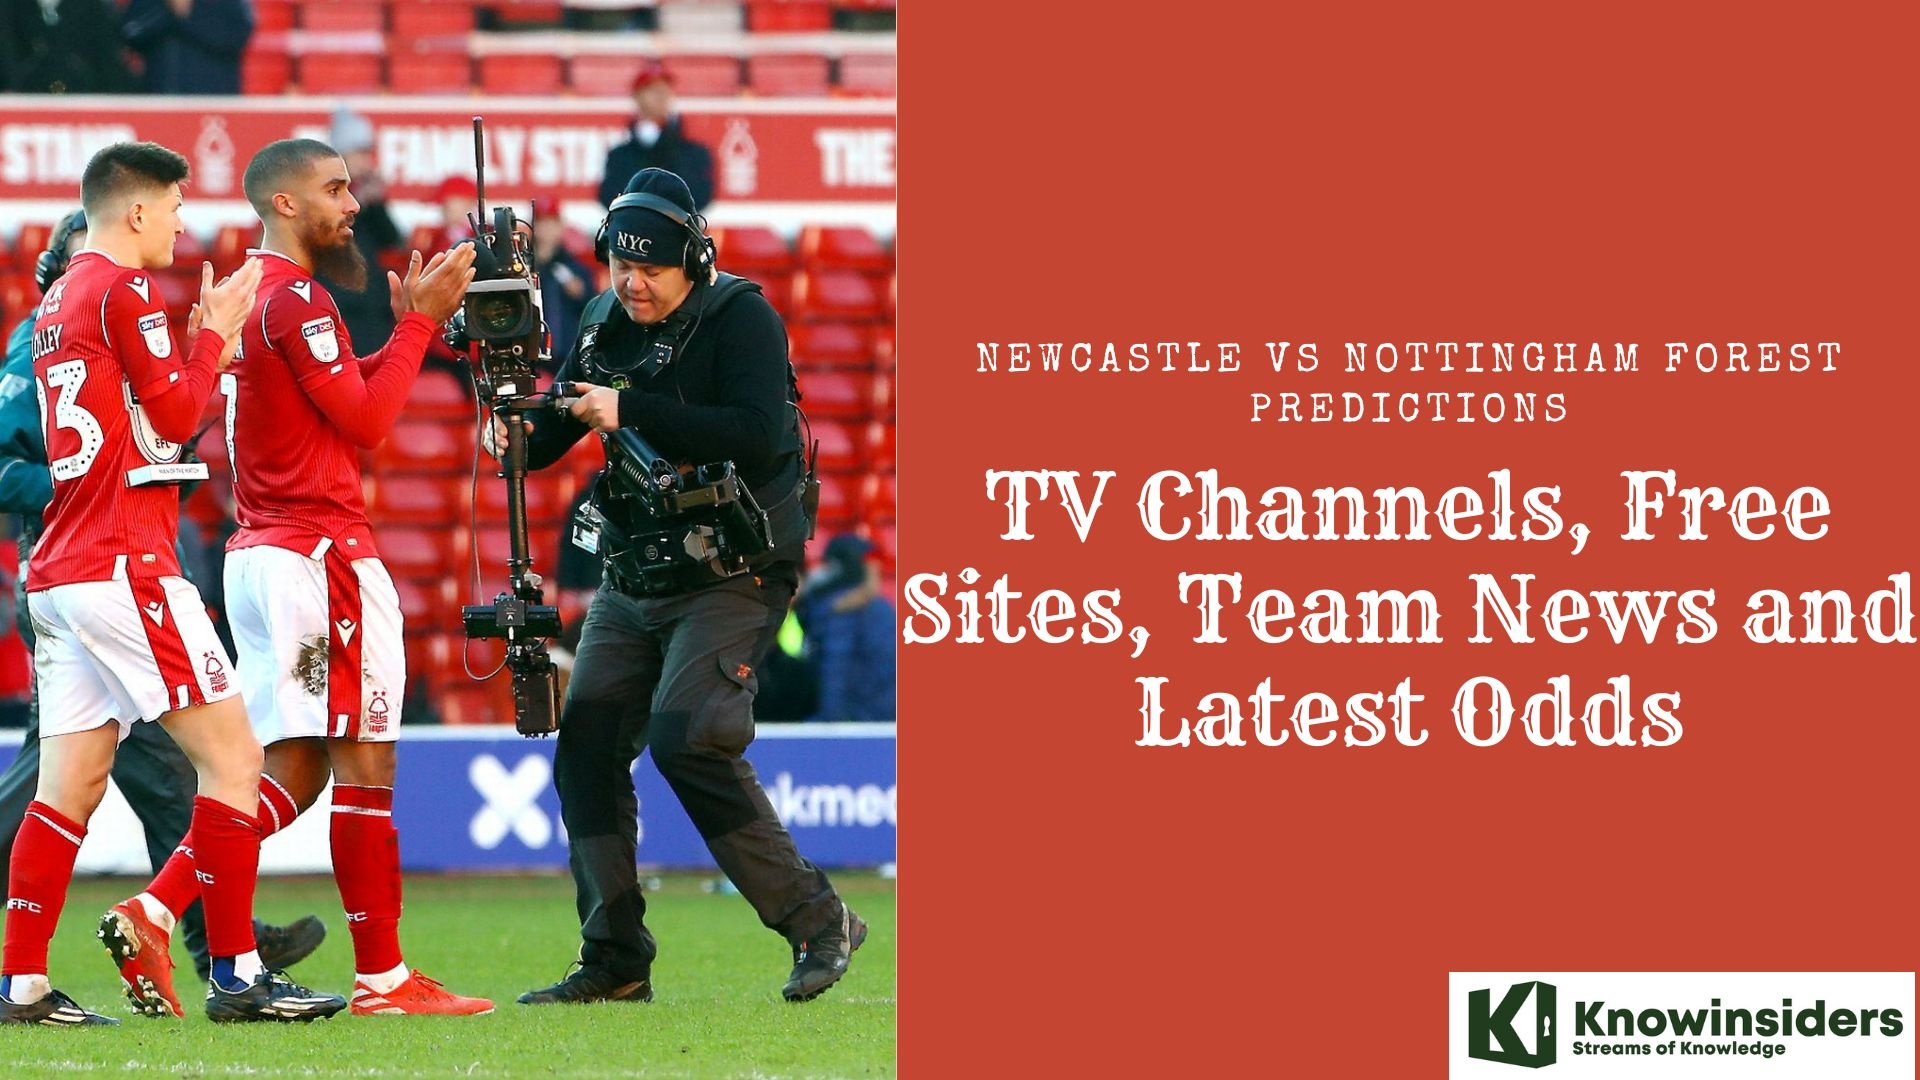 Newcastle vs Nottingham Forest Predictions: TV Channels, Free Sites, Team News and Latest Odds Knowinsiders.com